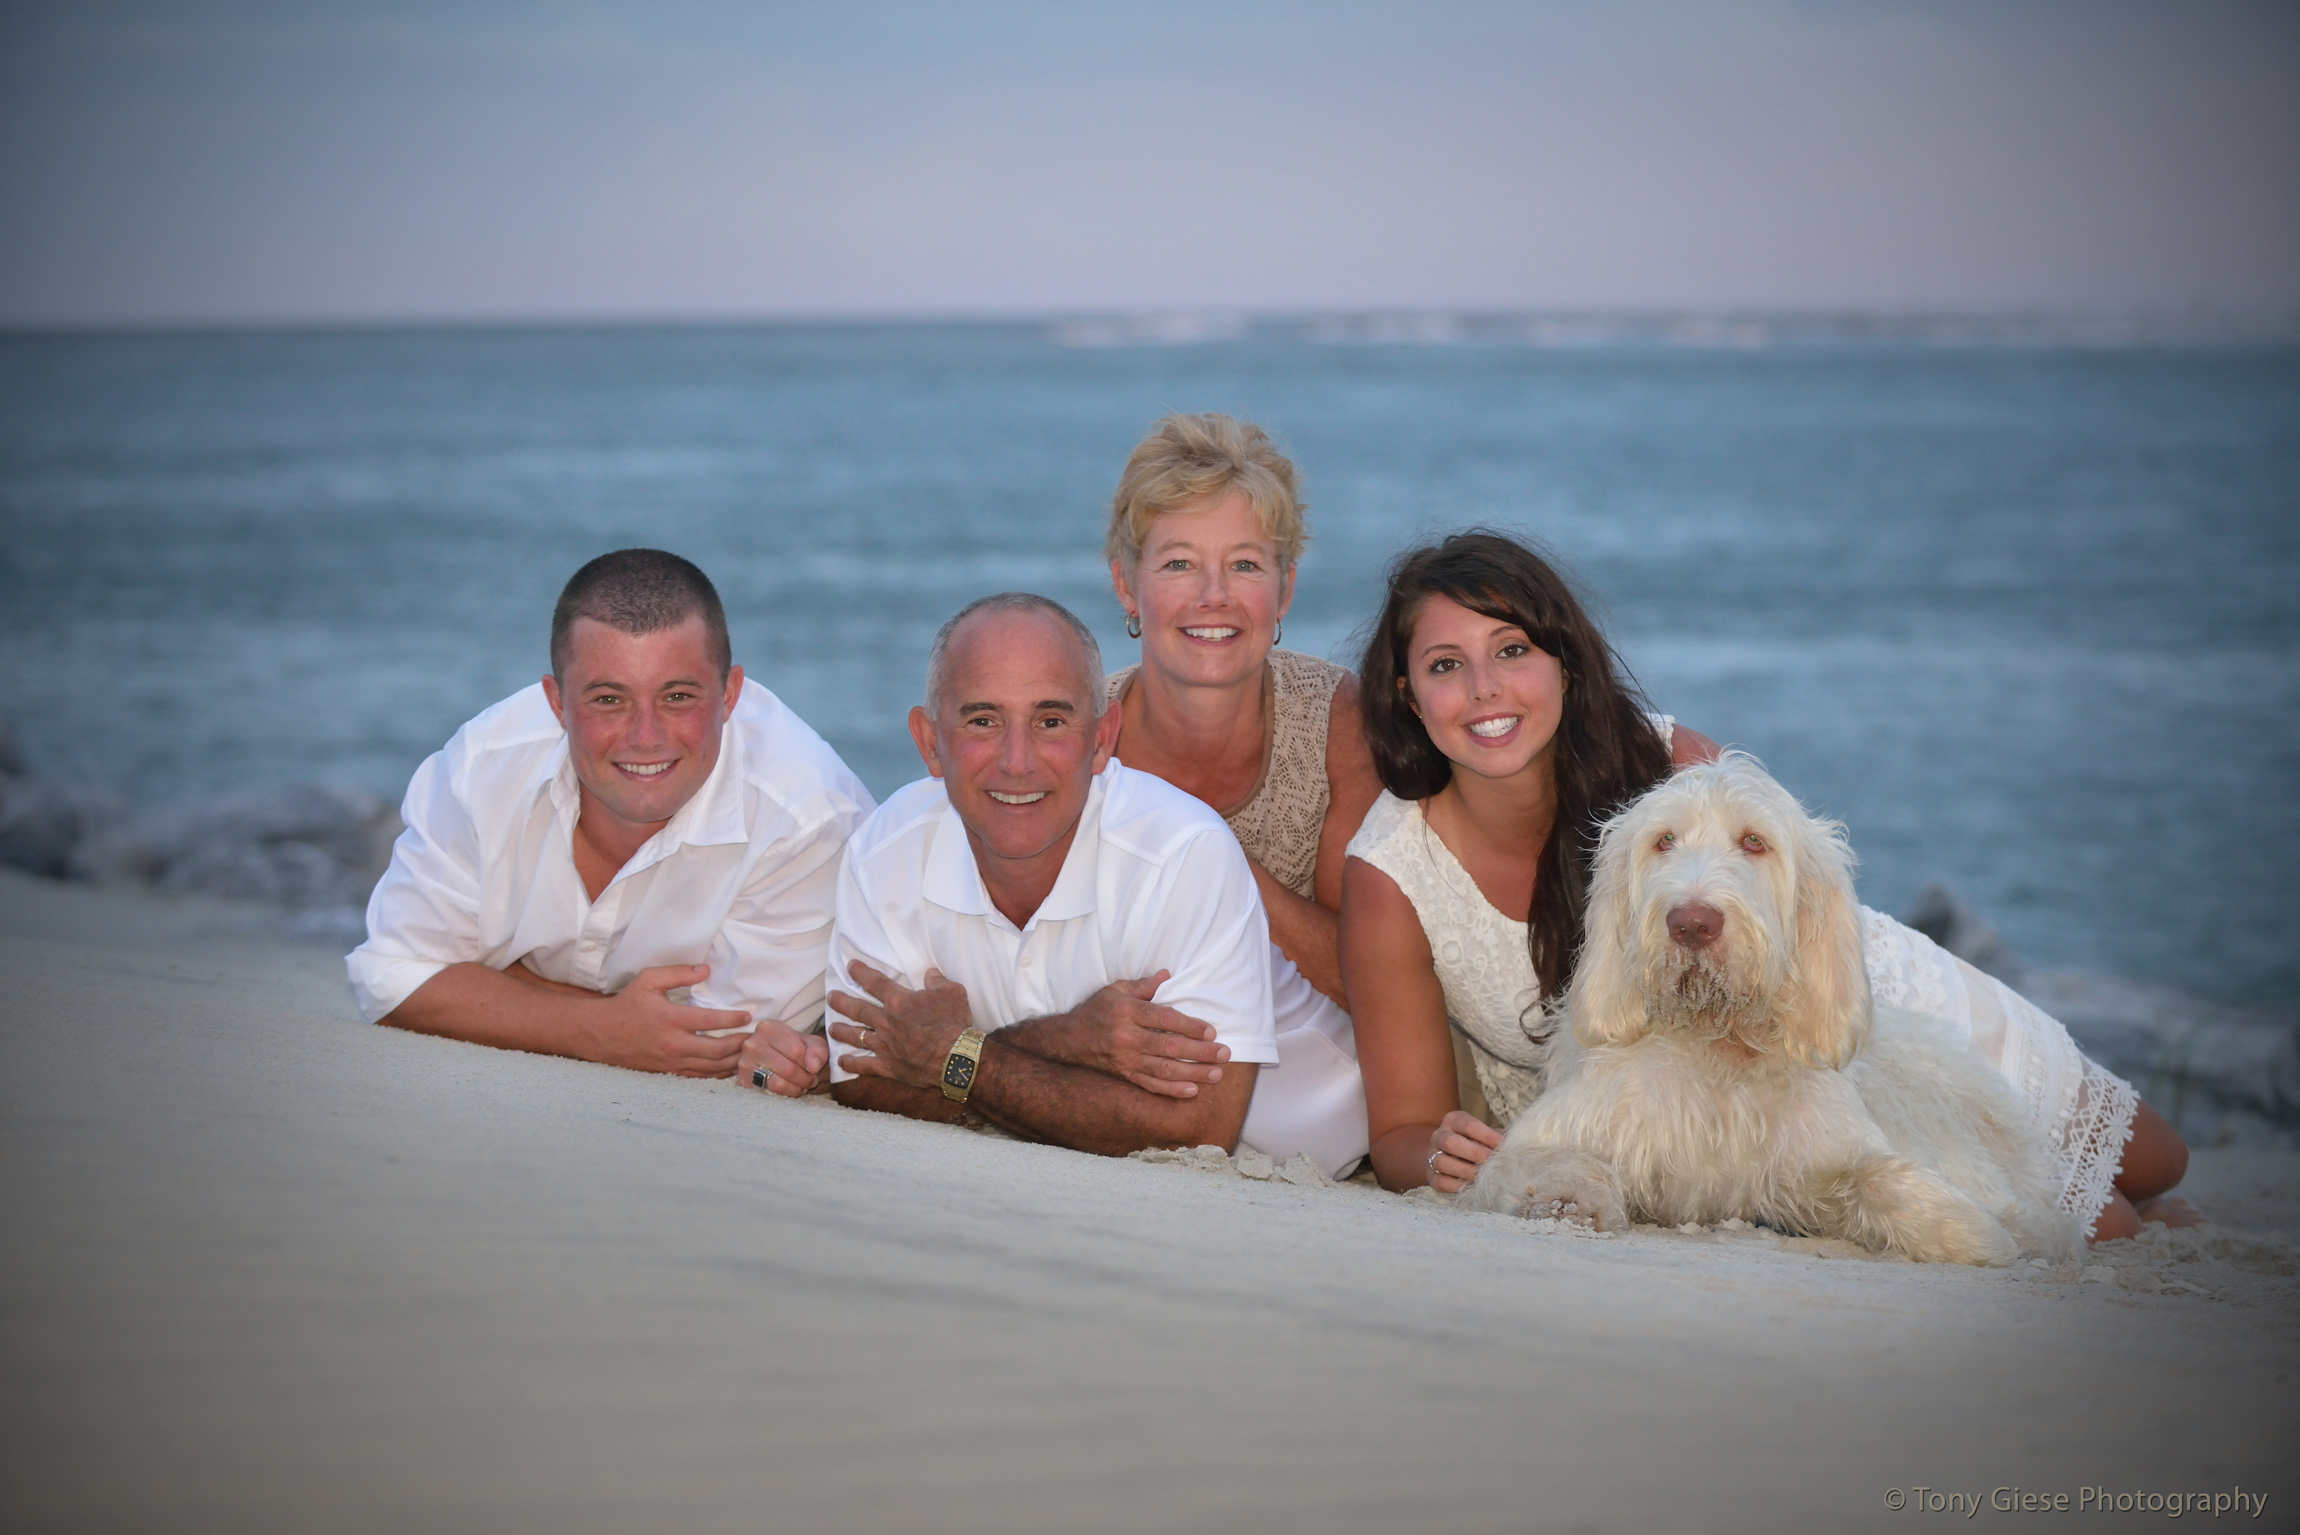 Wadsworth family beach portrait taken by professional photographer Tony Giese